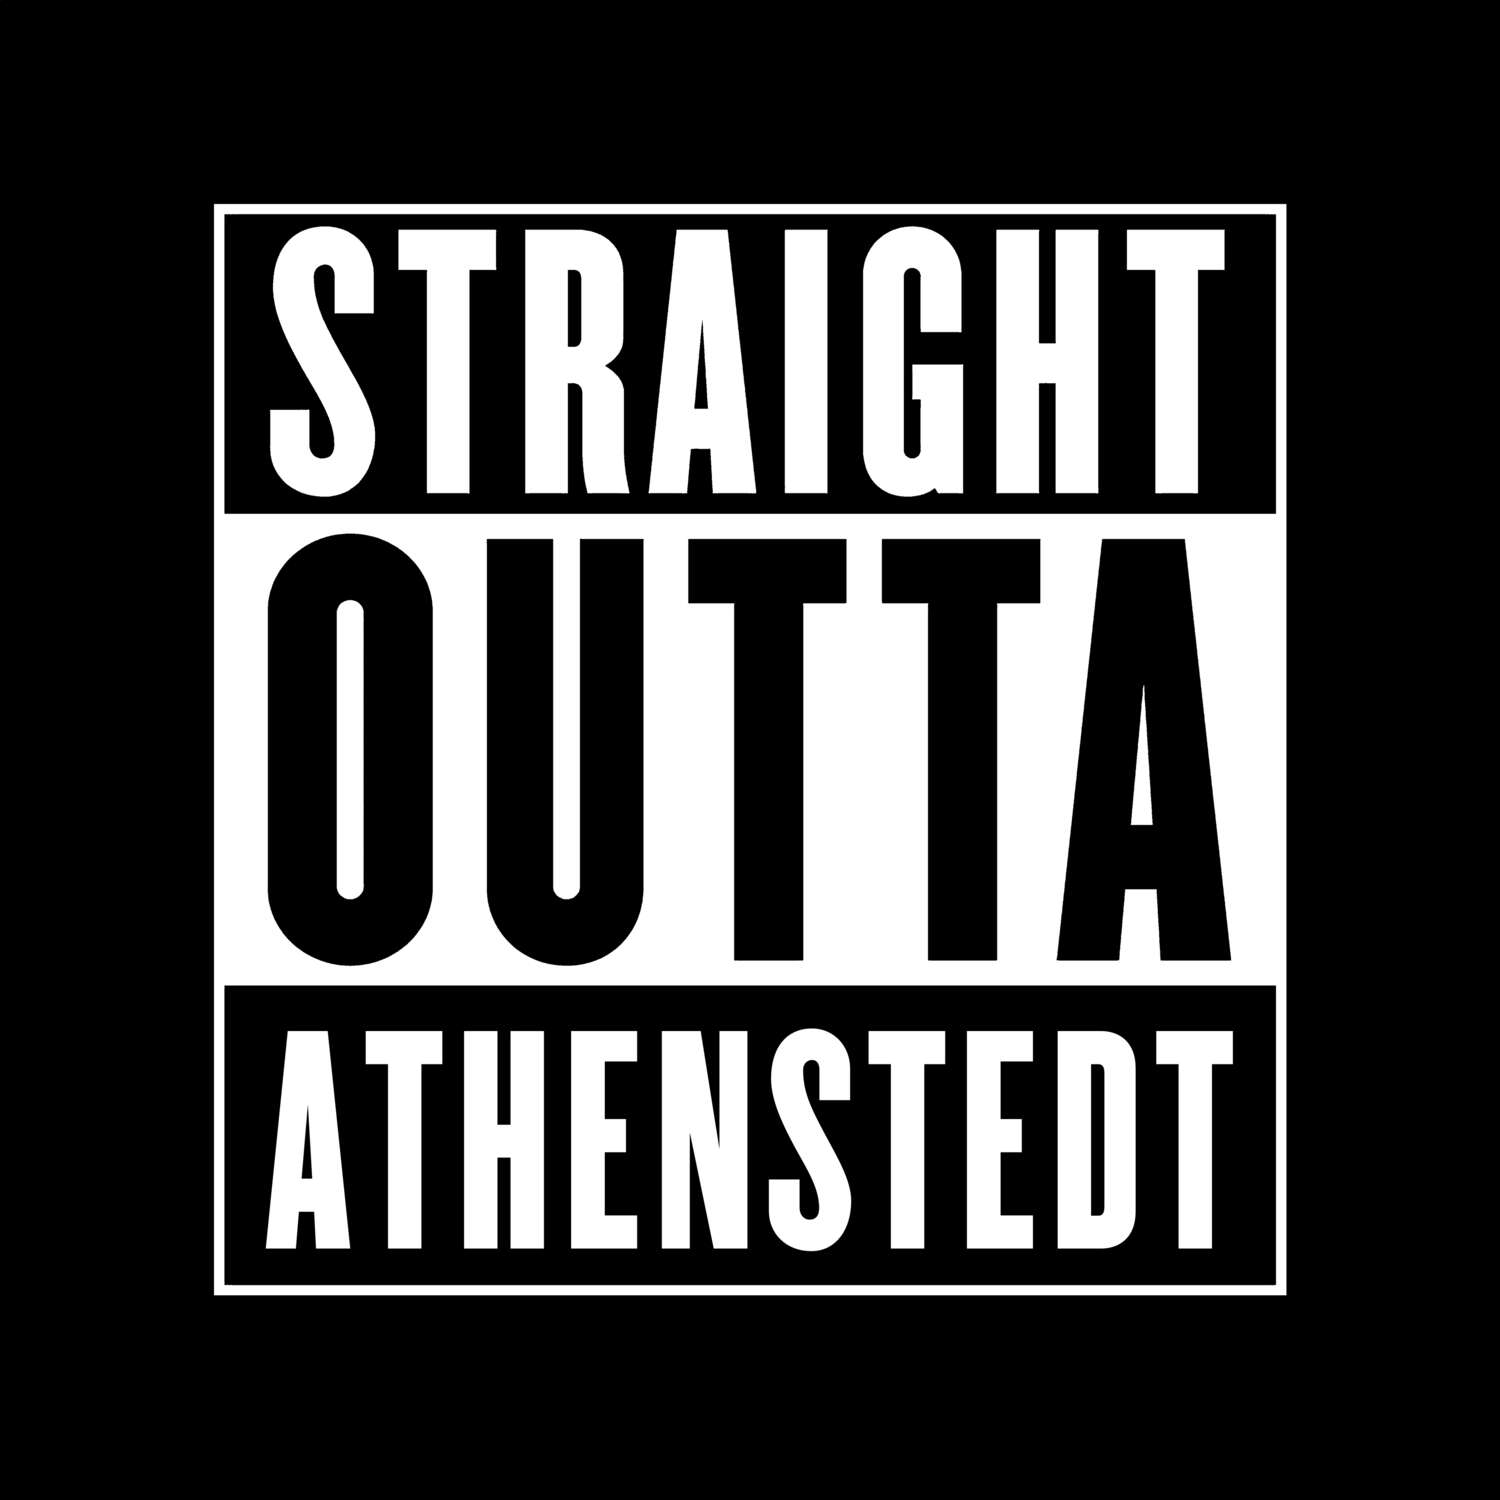 Athenstedt T-Shirt »Straight Outta«